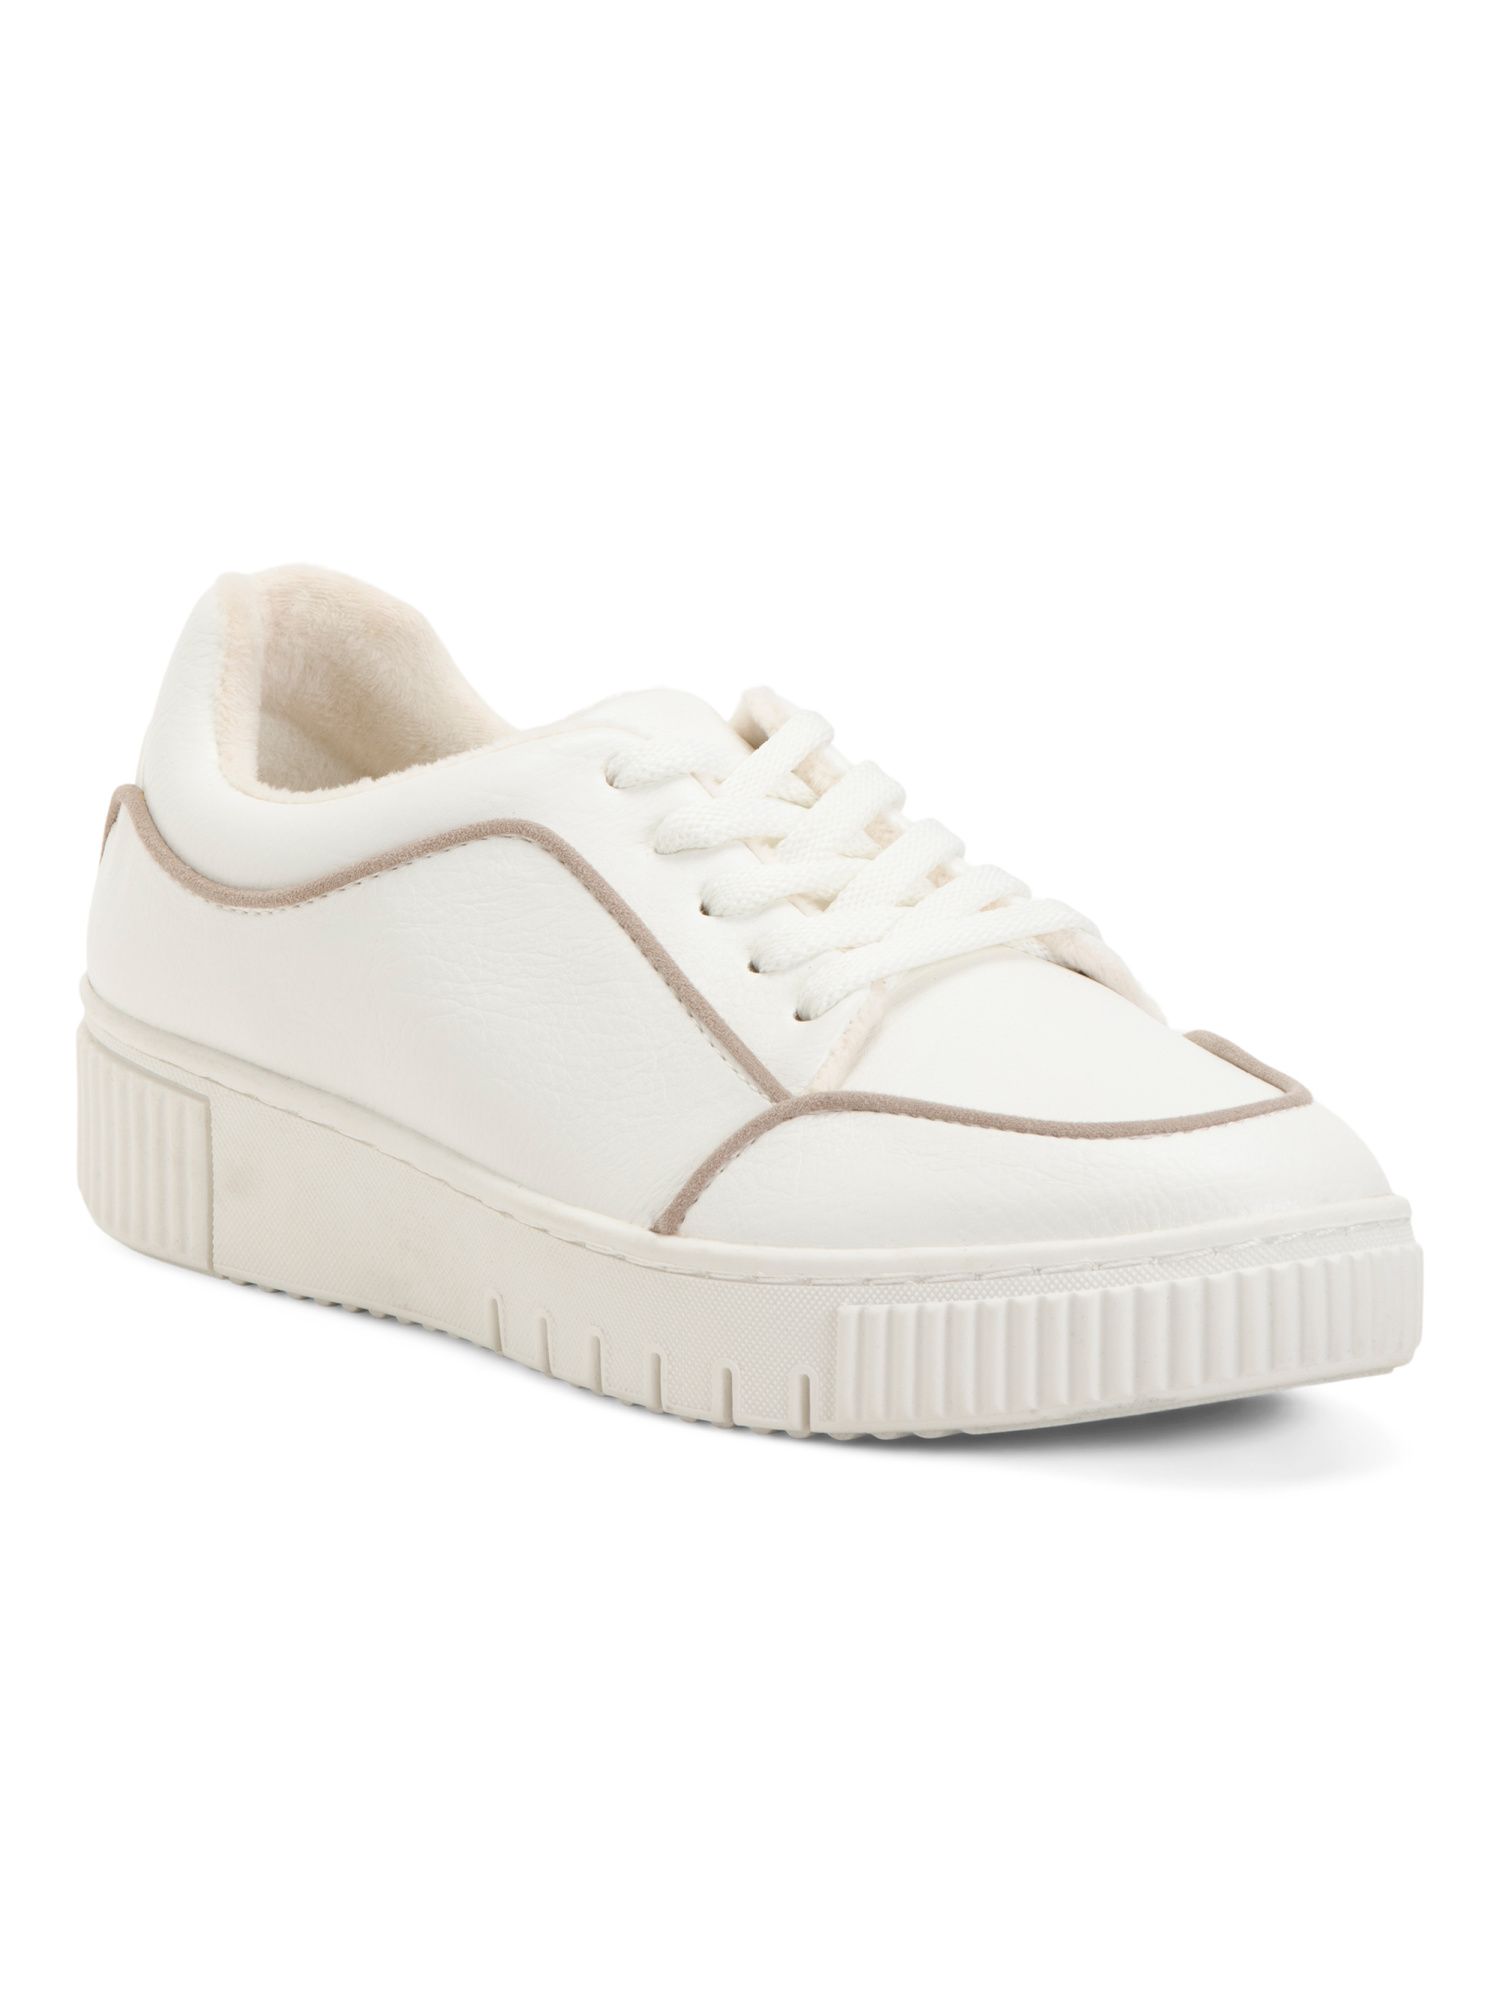 Comfort Faux Fur Lined Lace Up Sneakers | TJ Maxx